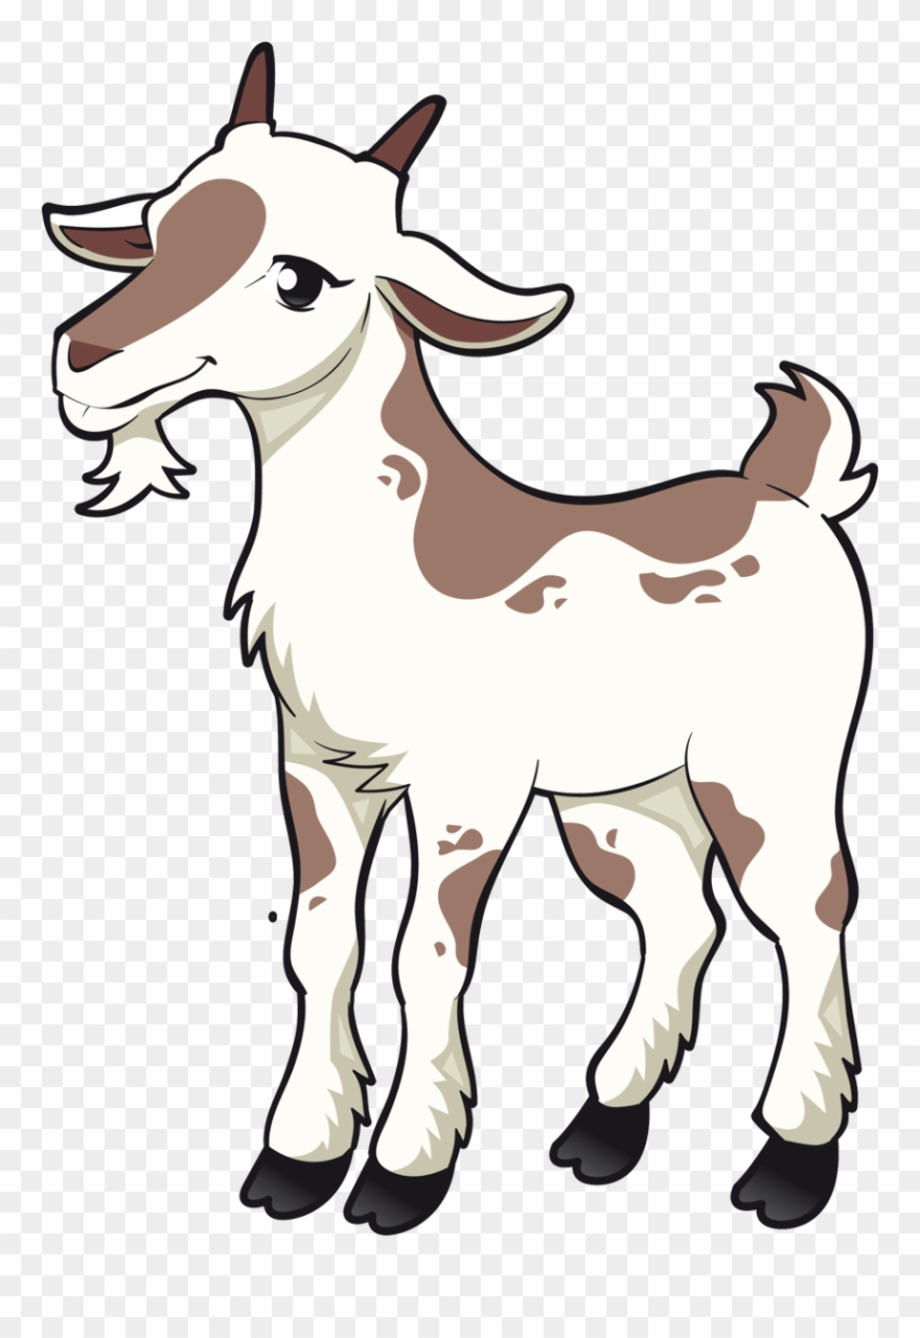 Download High Quality goat clipart animals Transparent PNG Images - Art